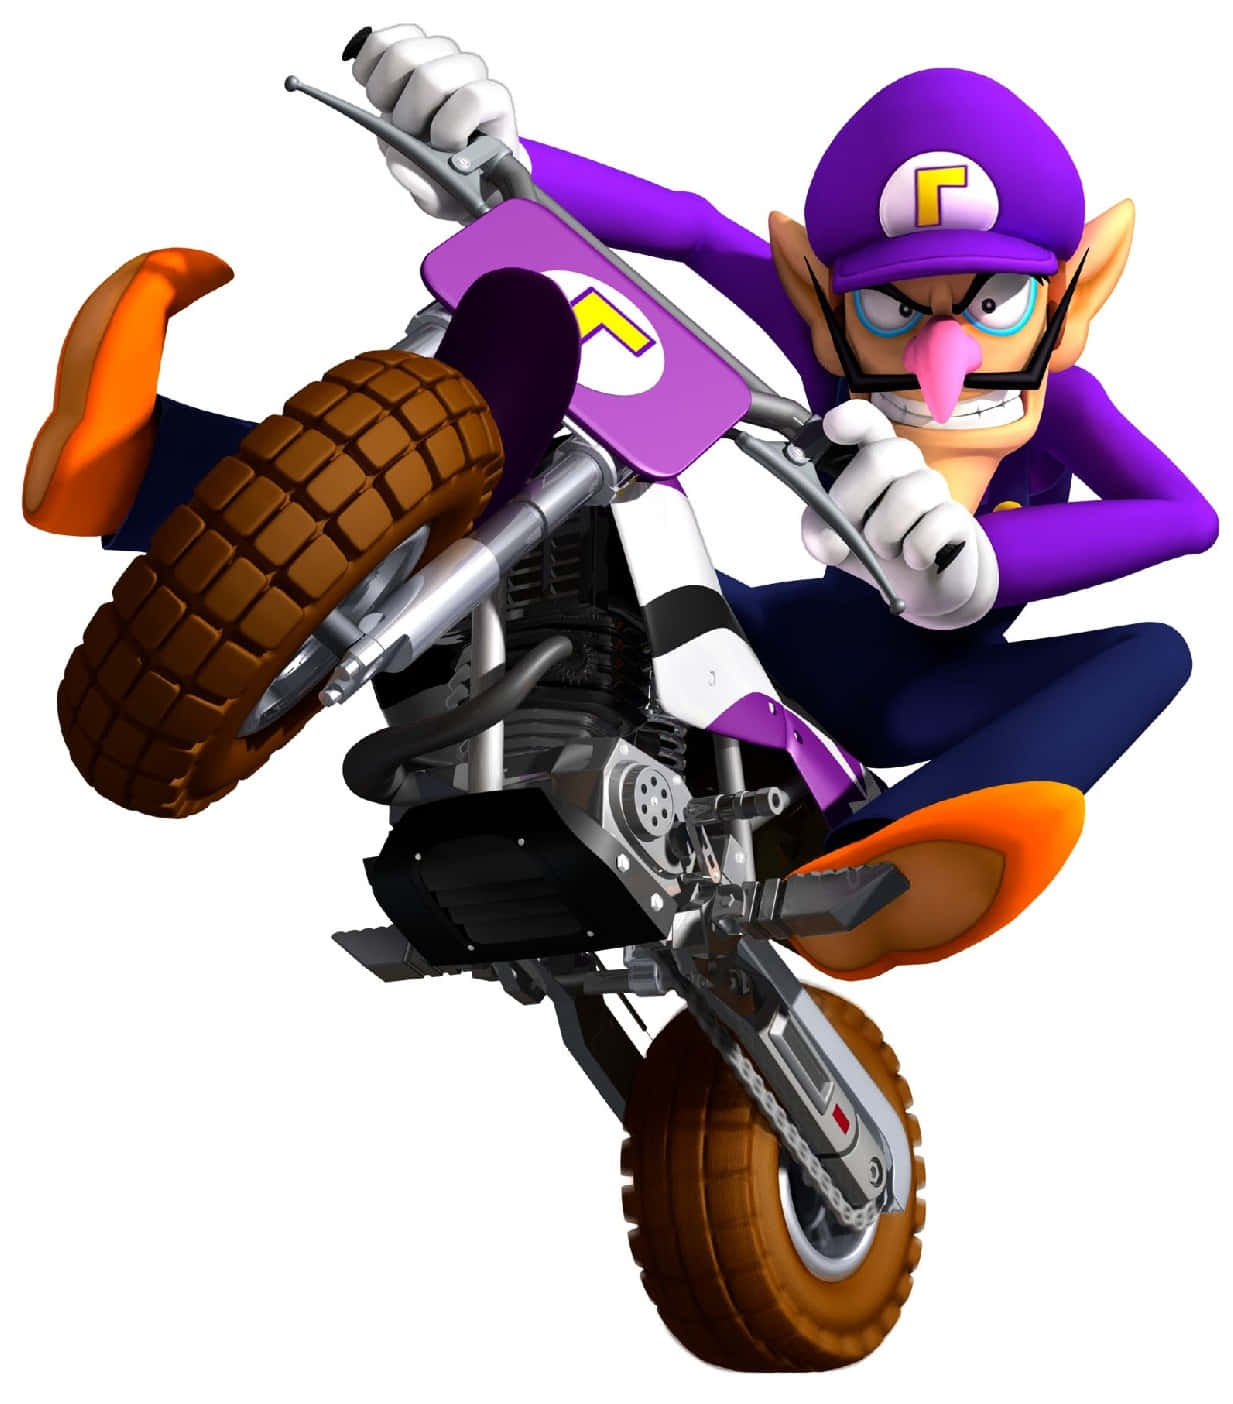 Waluigi Posing In His Iconic Style Against A Colorful Geometric Background.